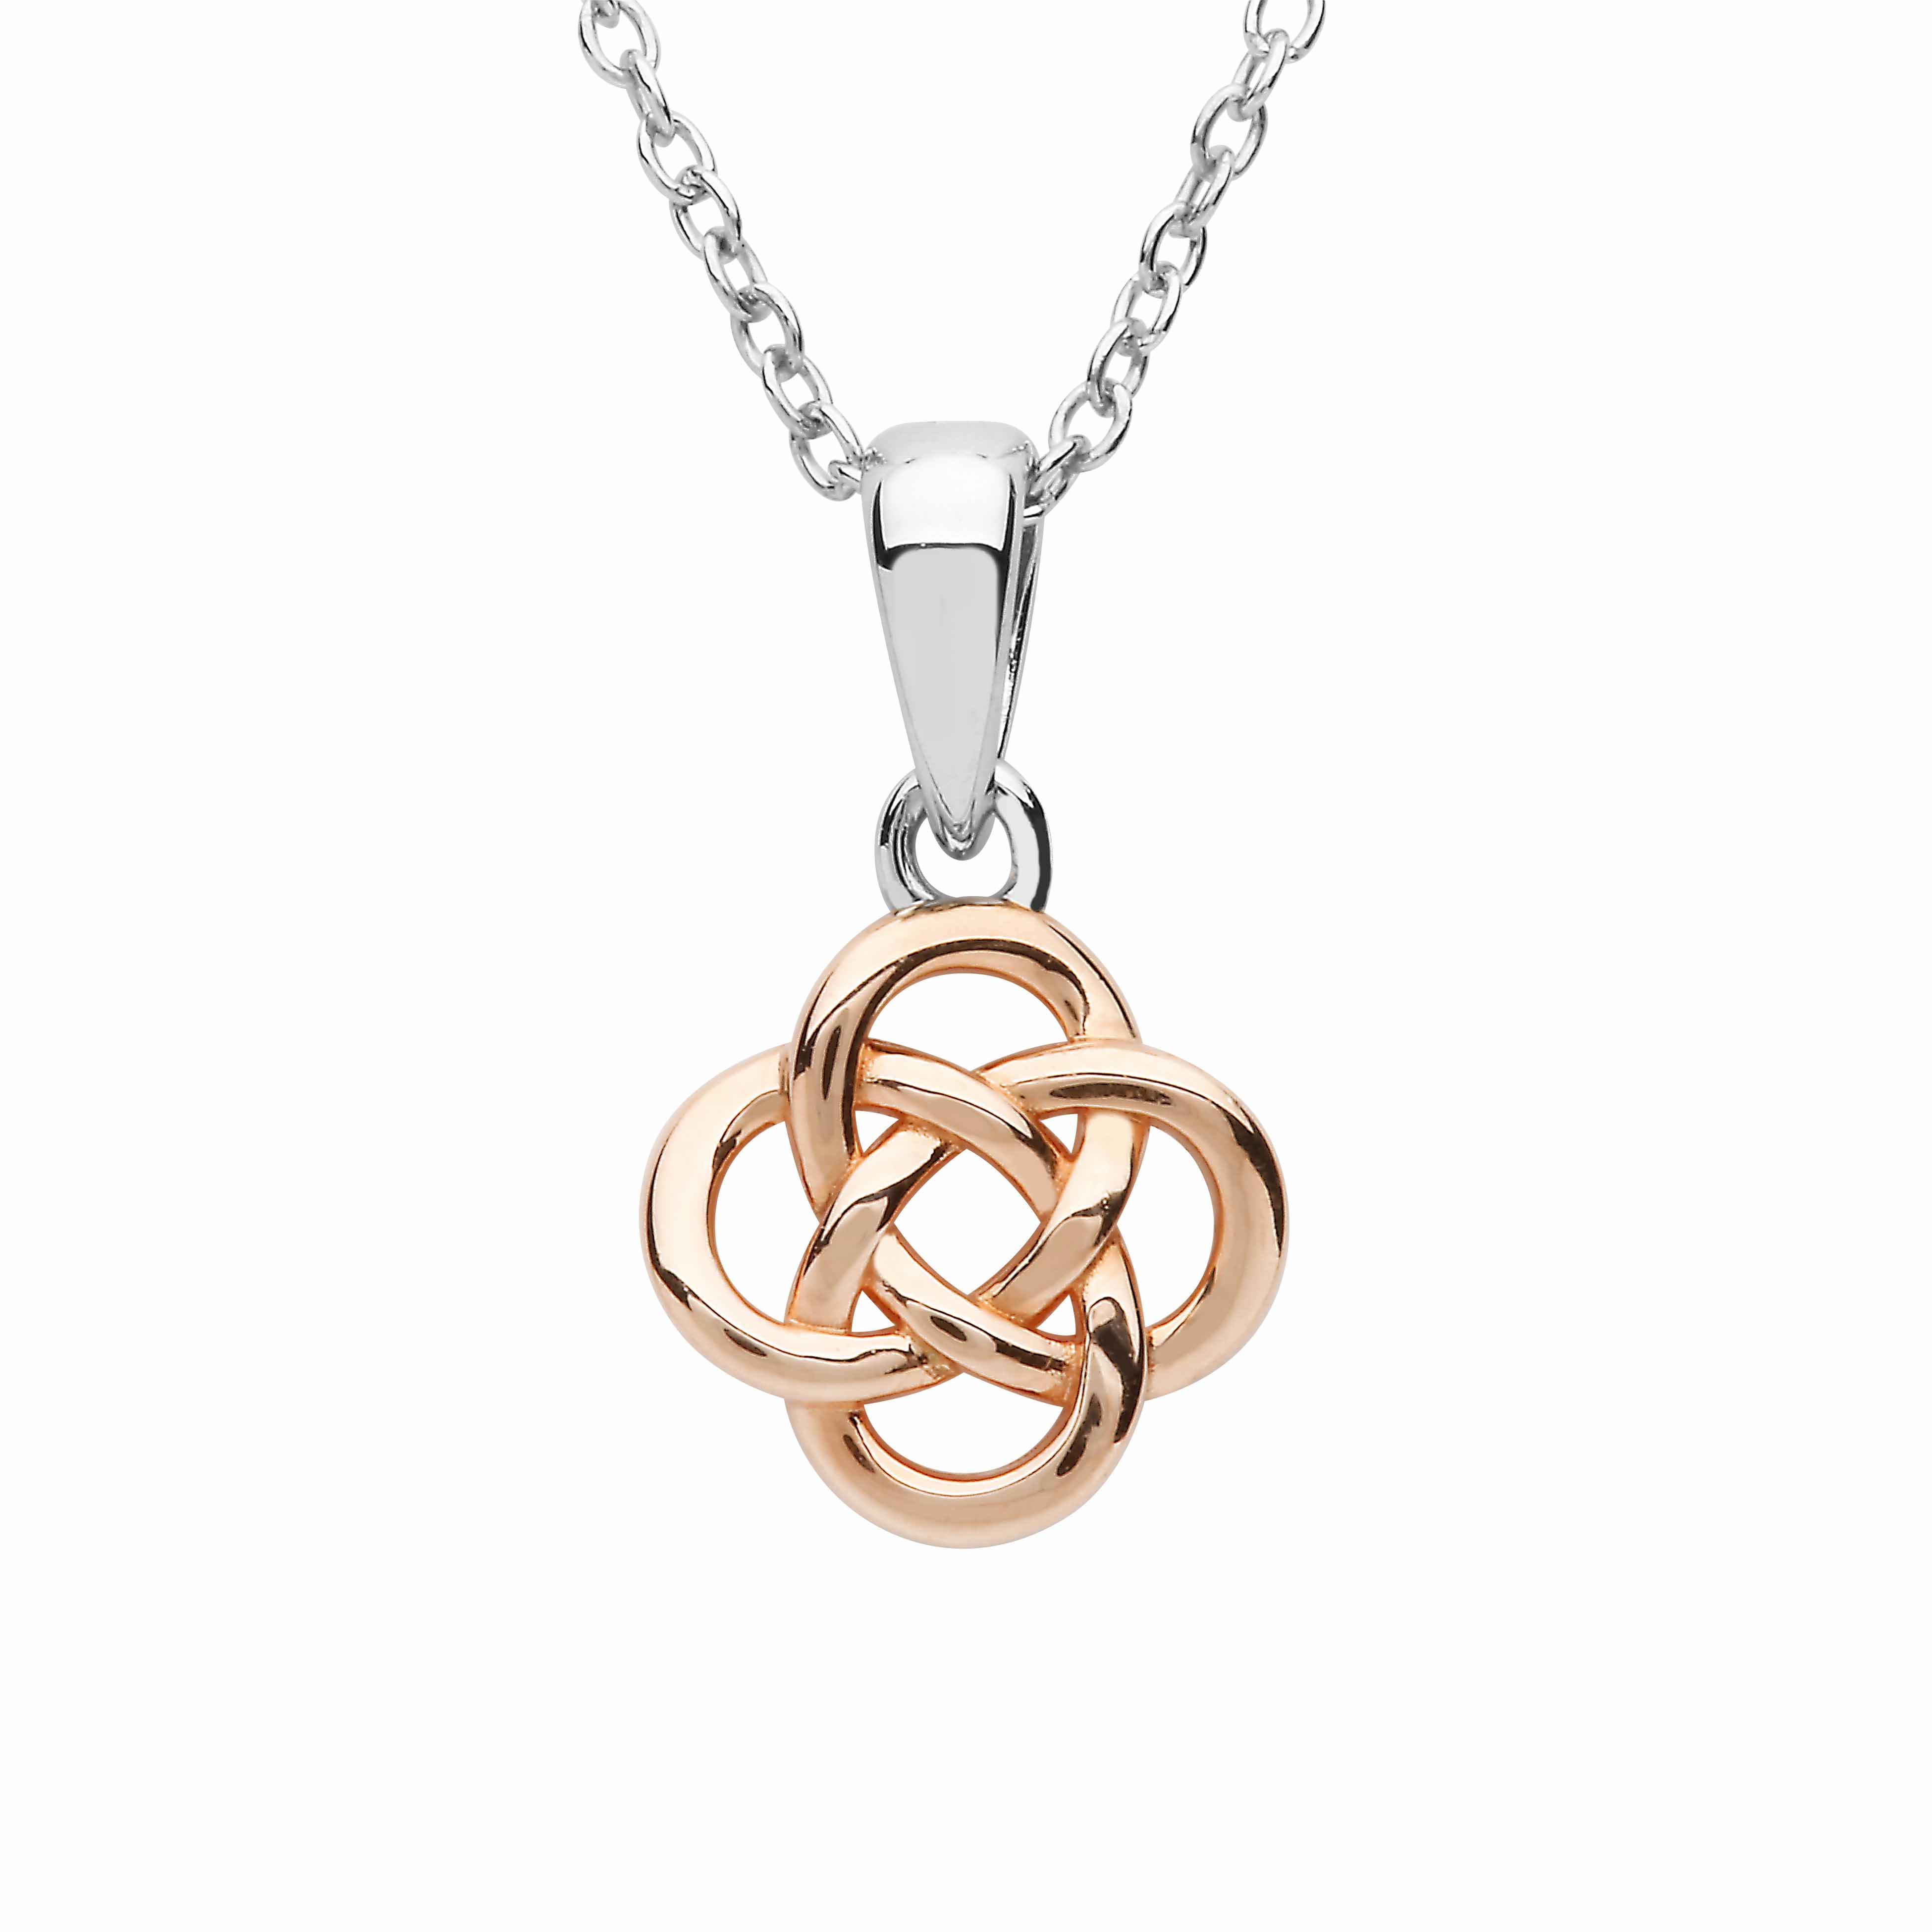 Product image for Irish Necklace | Sterling Silver Rose Gold Celtic Knot Pendant